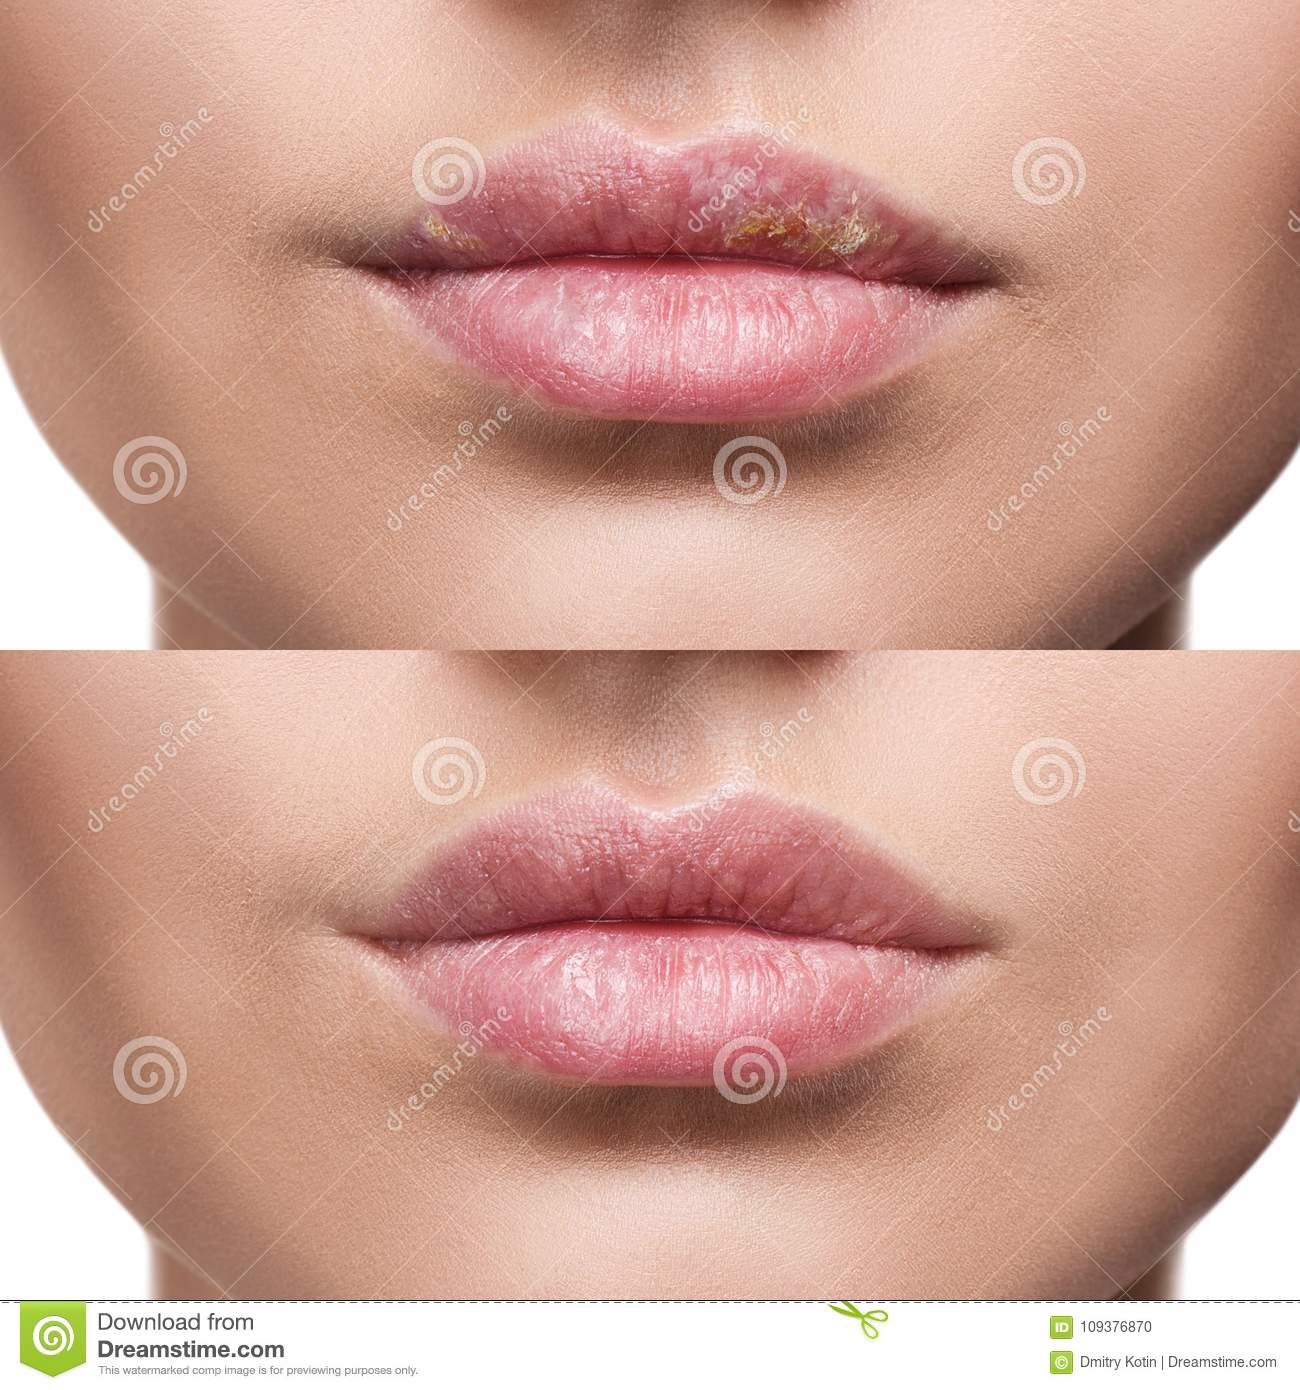 Lips With Herpes Before And After Treatment. Stock Photo